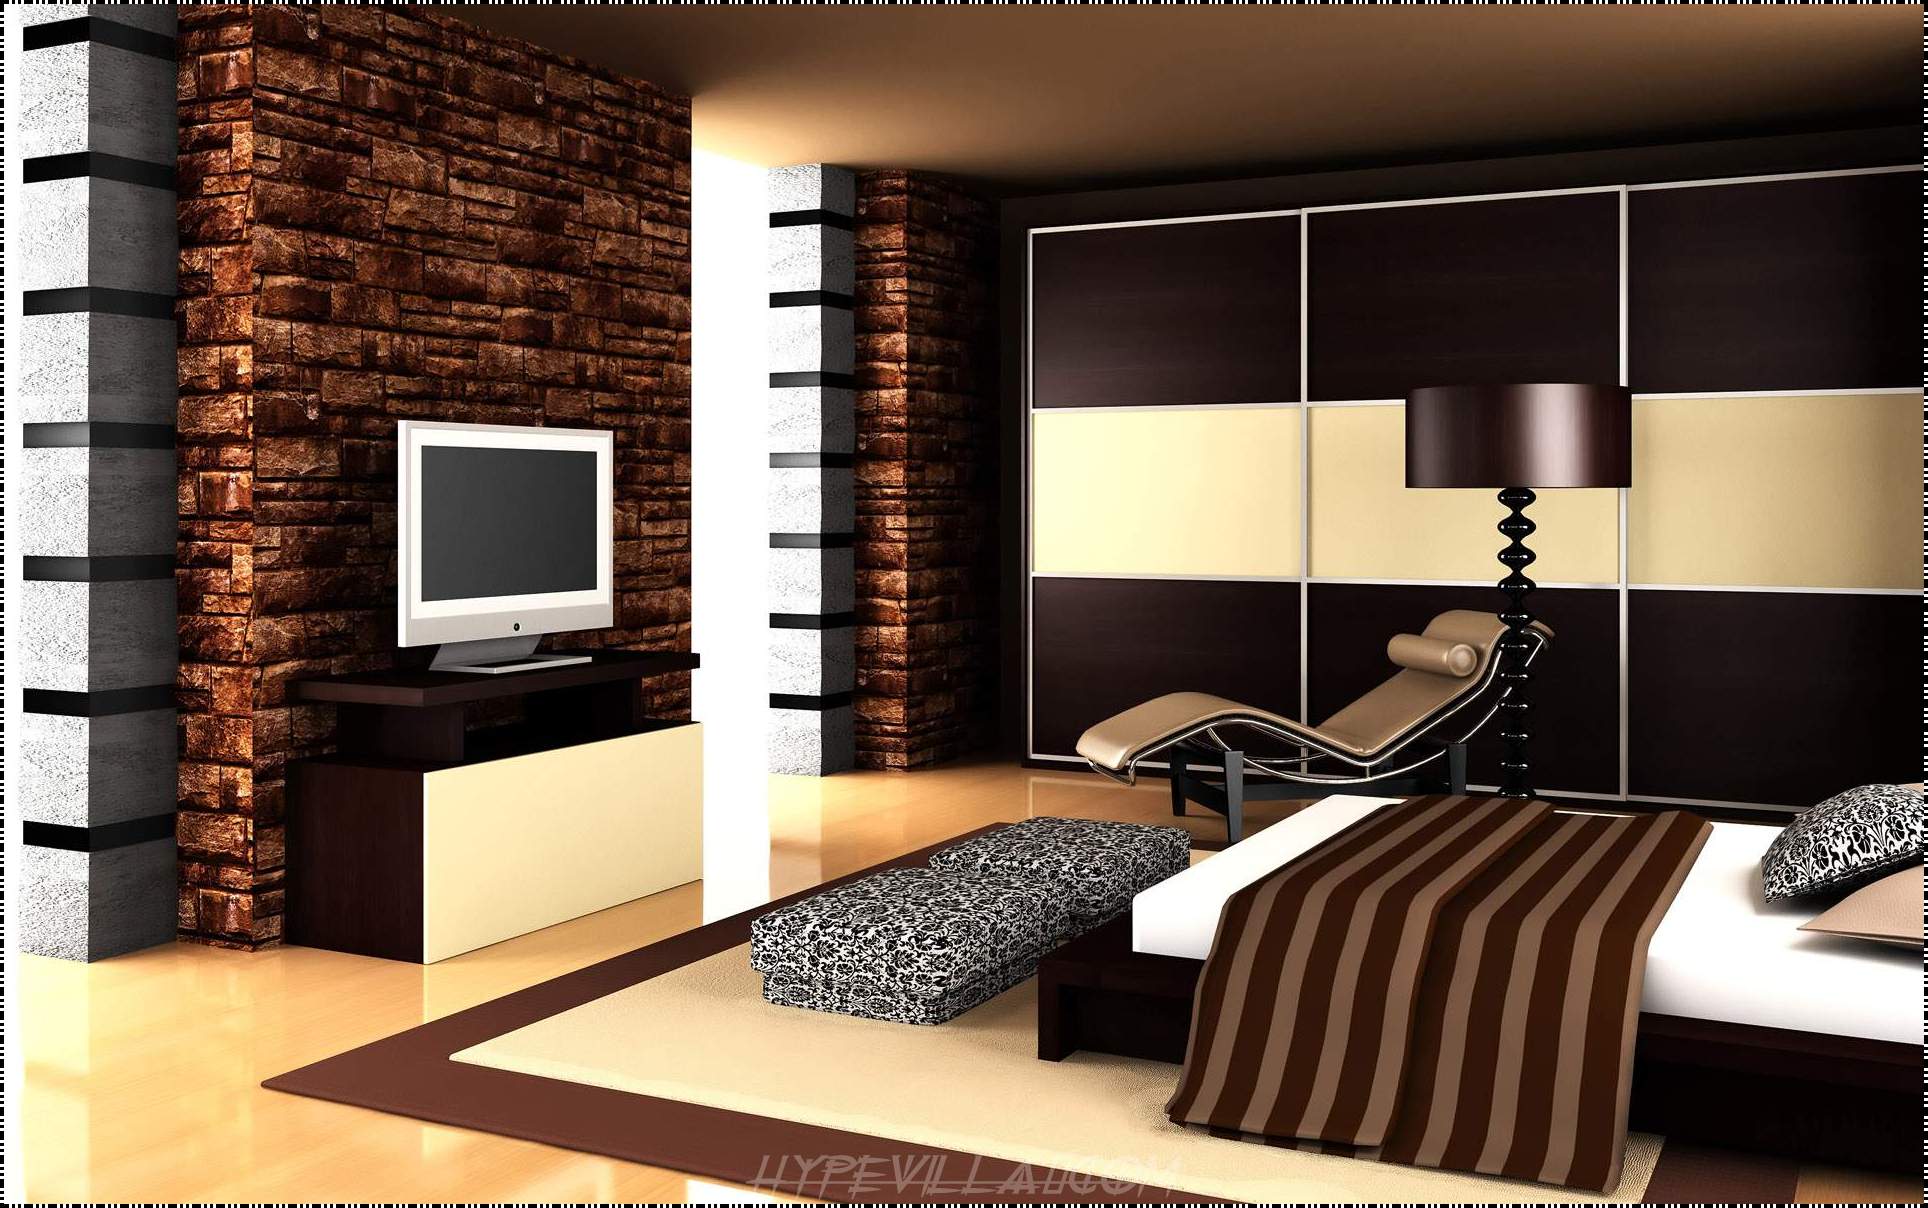 House Plans Interior Ideas With Wallpaper Stylish Home Designs